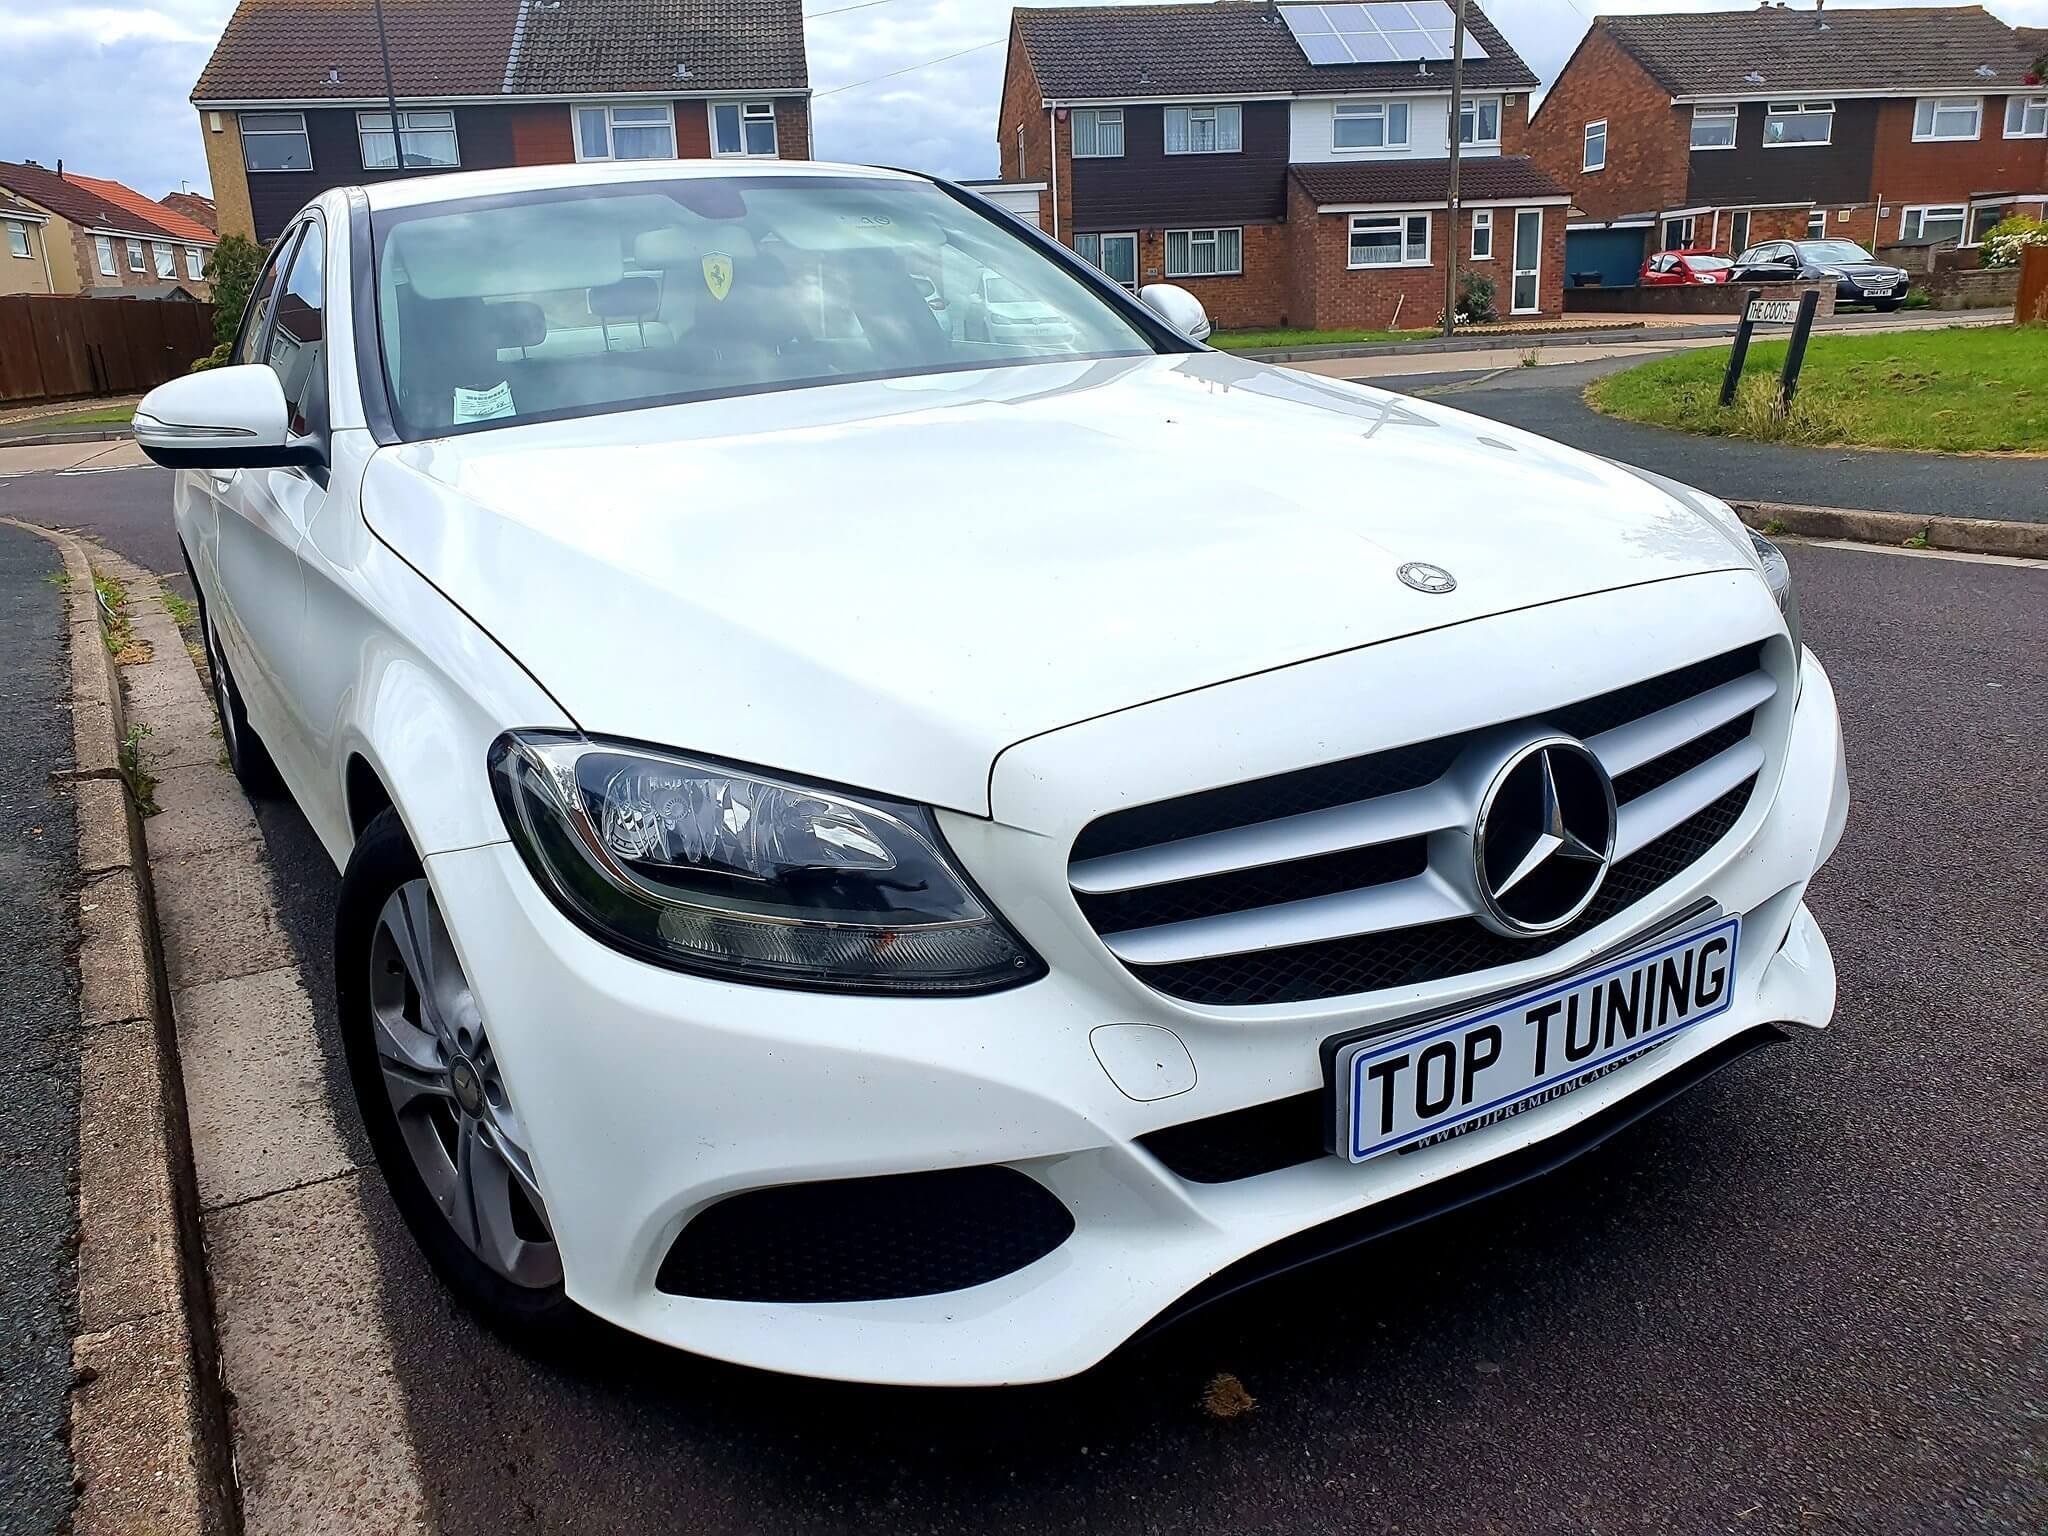 Top Tuning Number plate on Mercedes